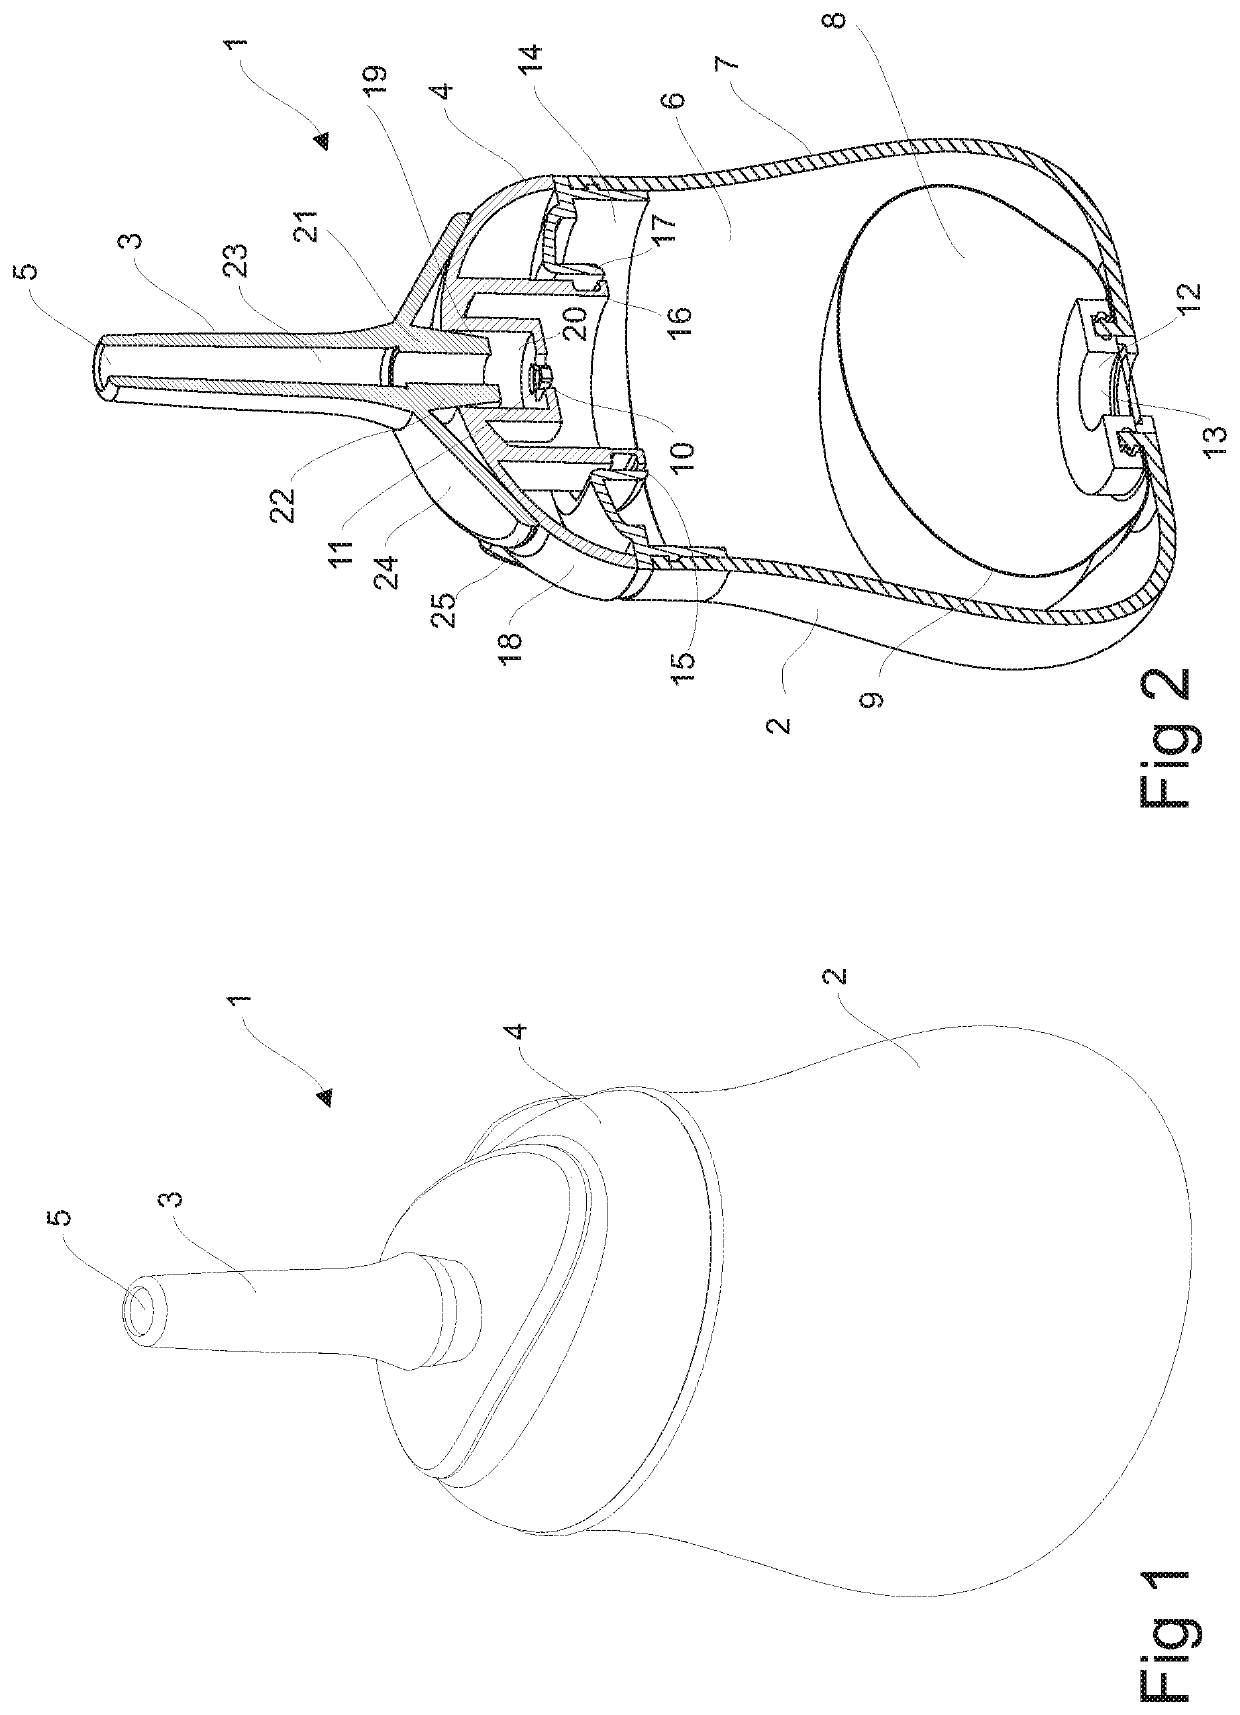 Enema device and a method of refilling said device with an enema